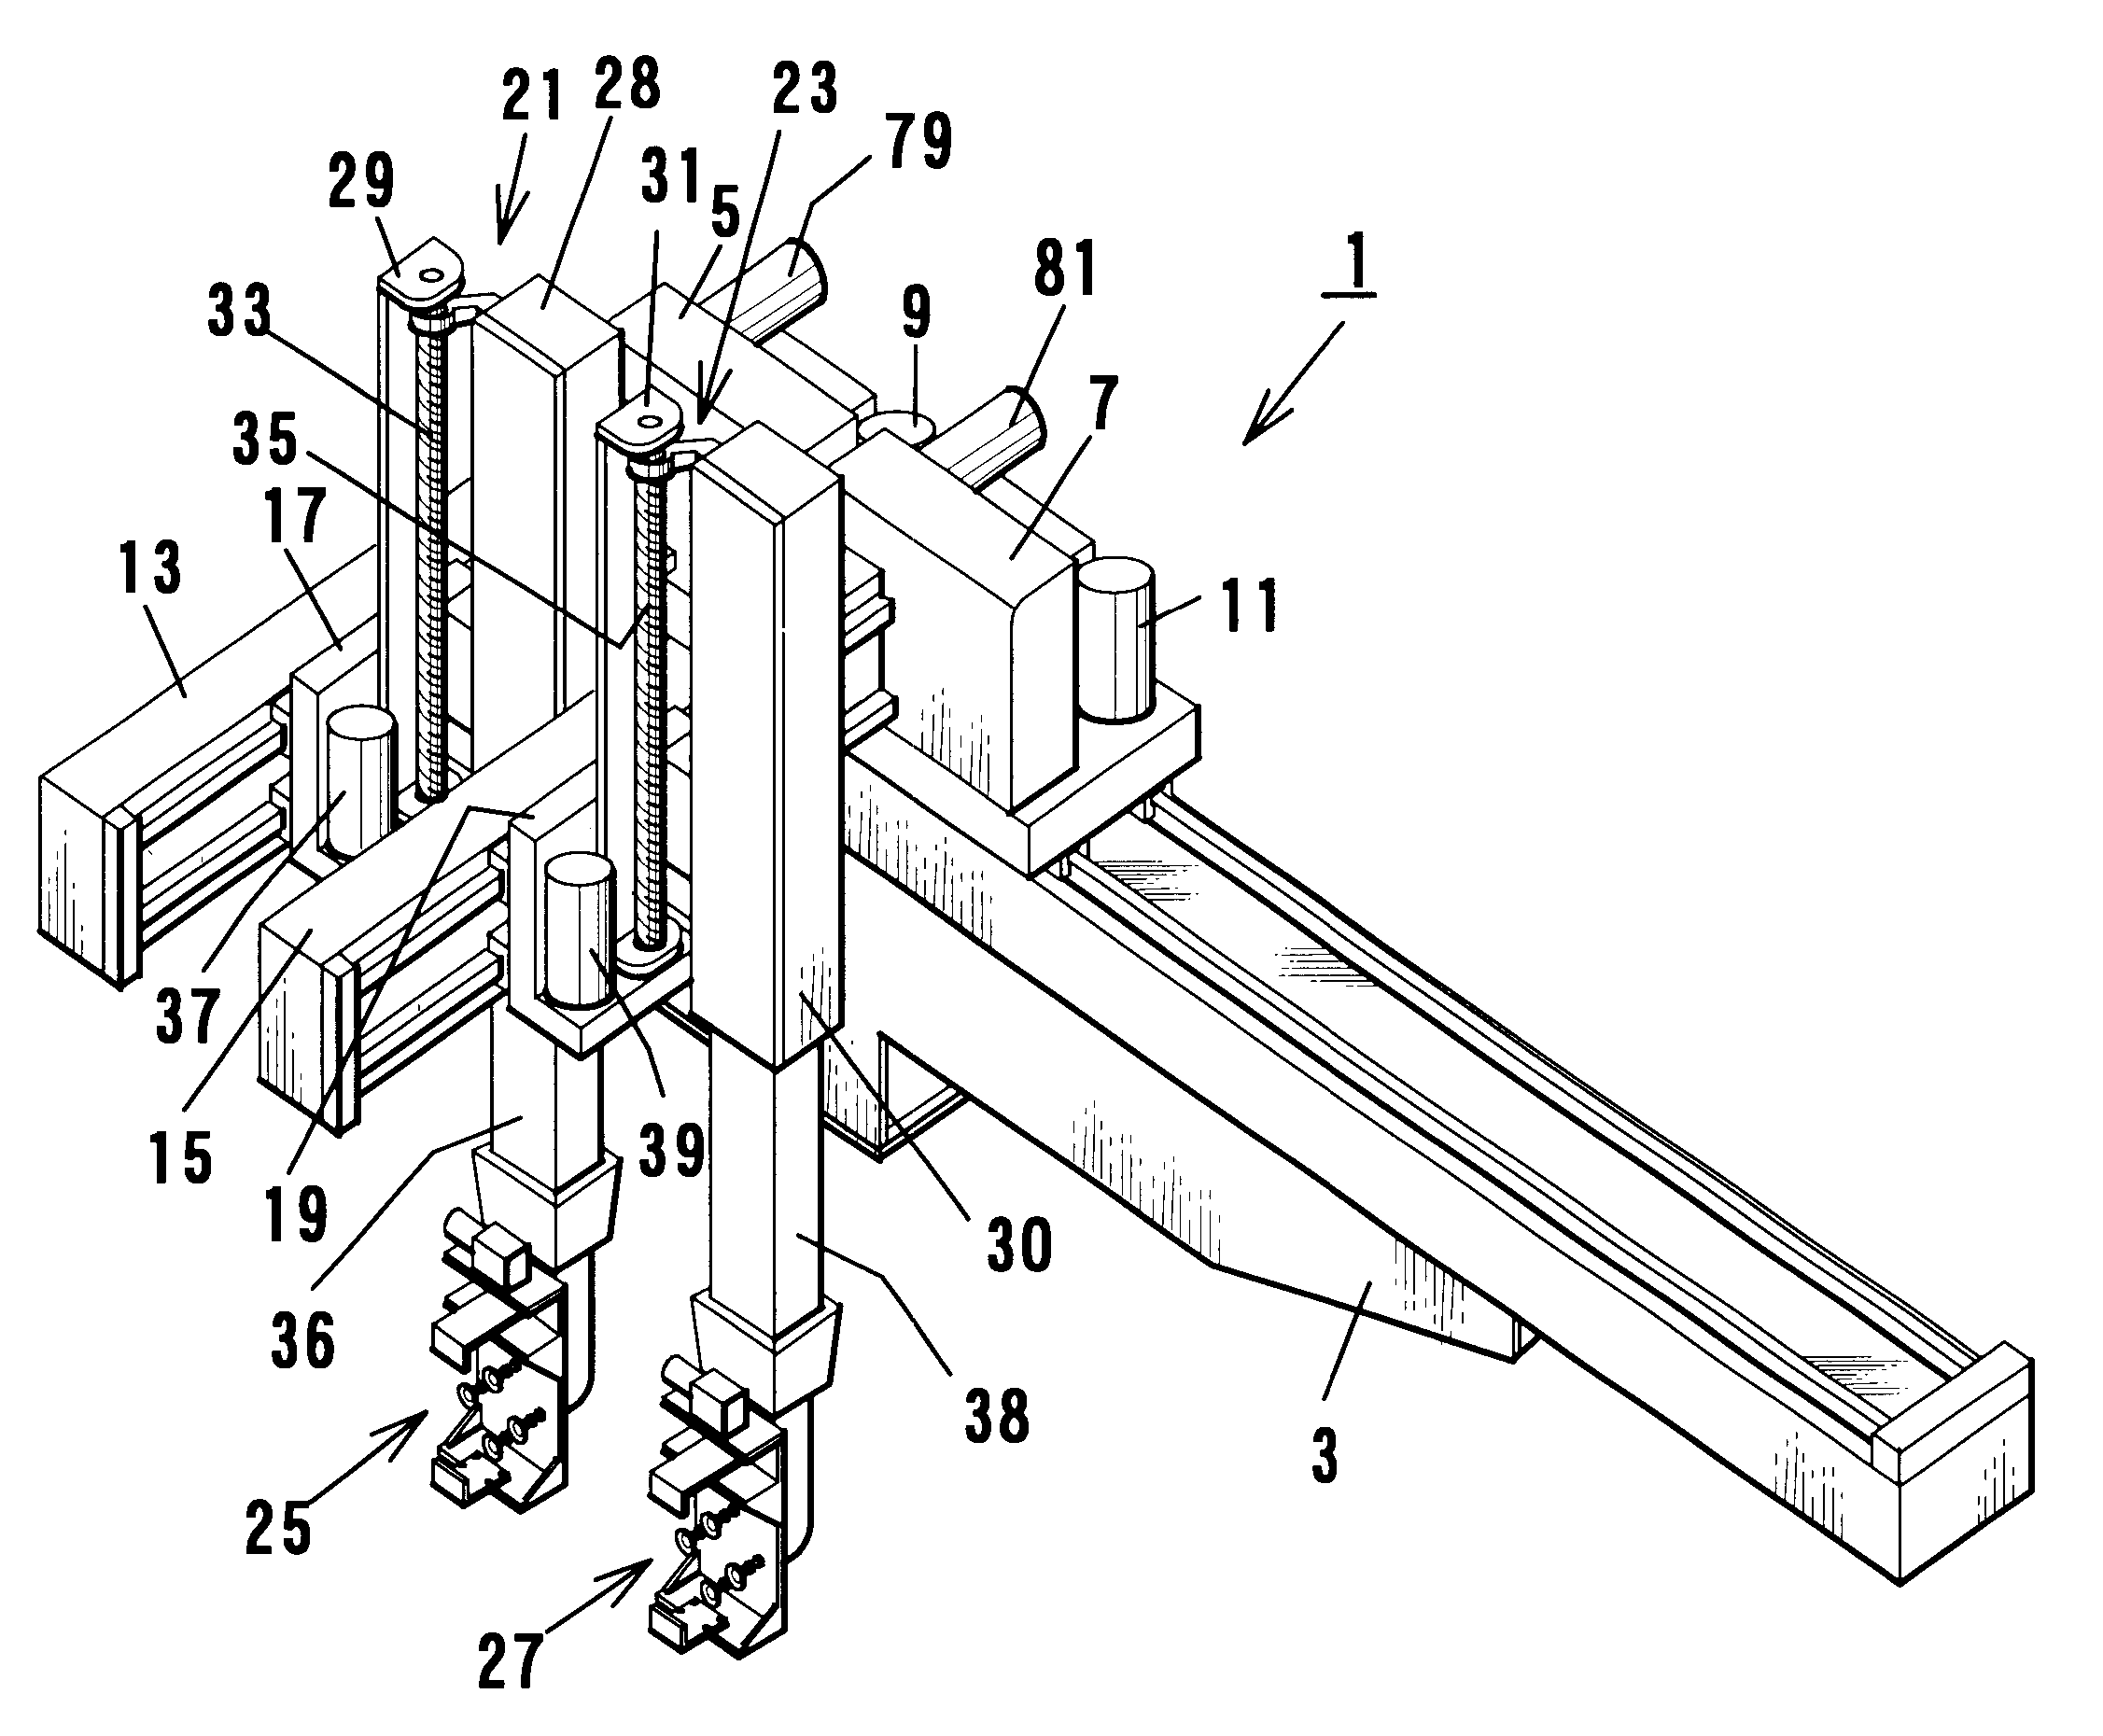 Removal apparatus for molded product and method for removing molded products